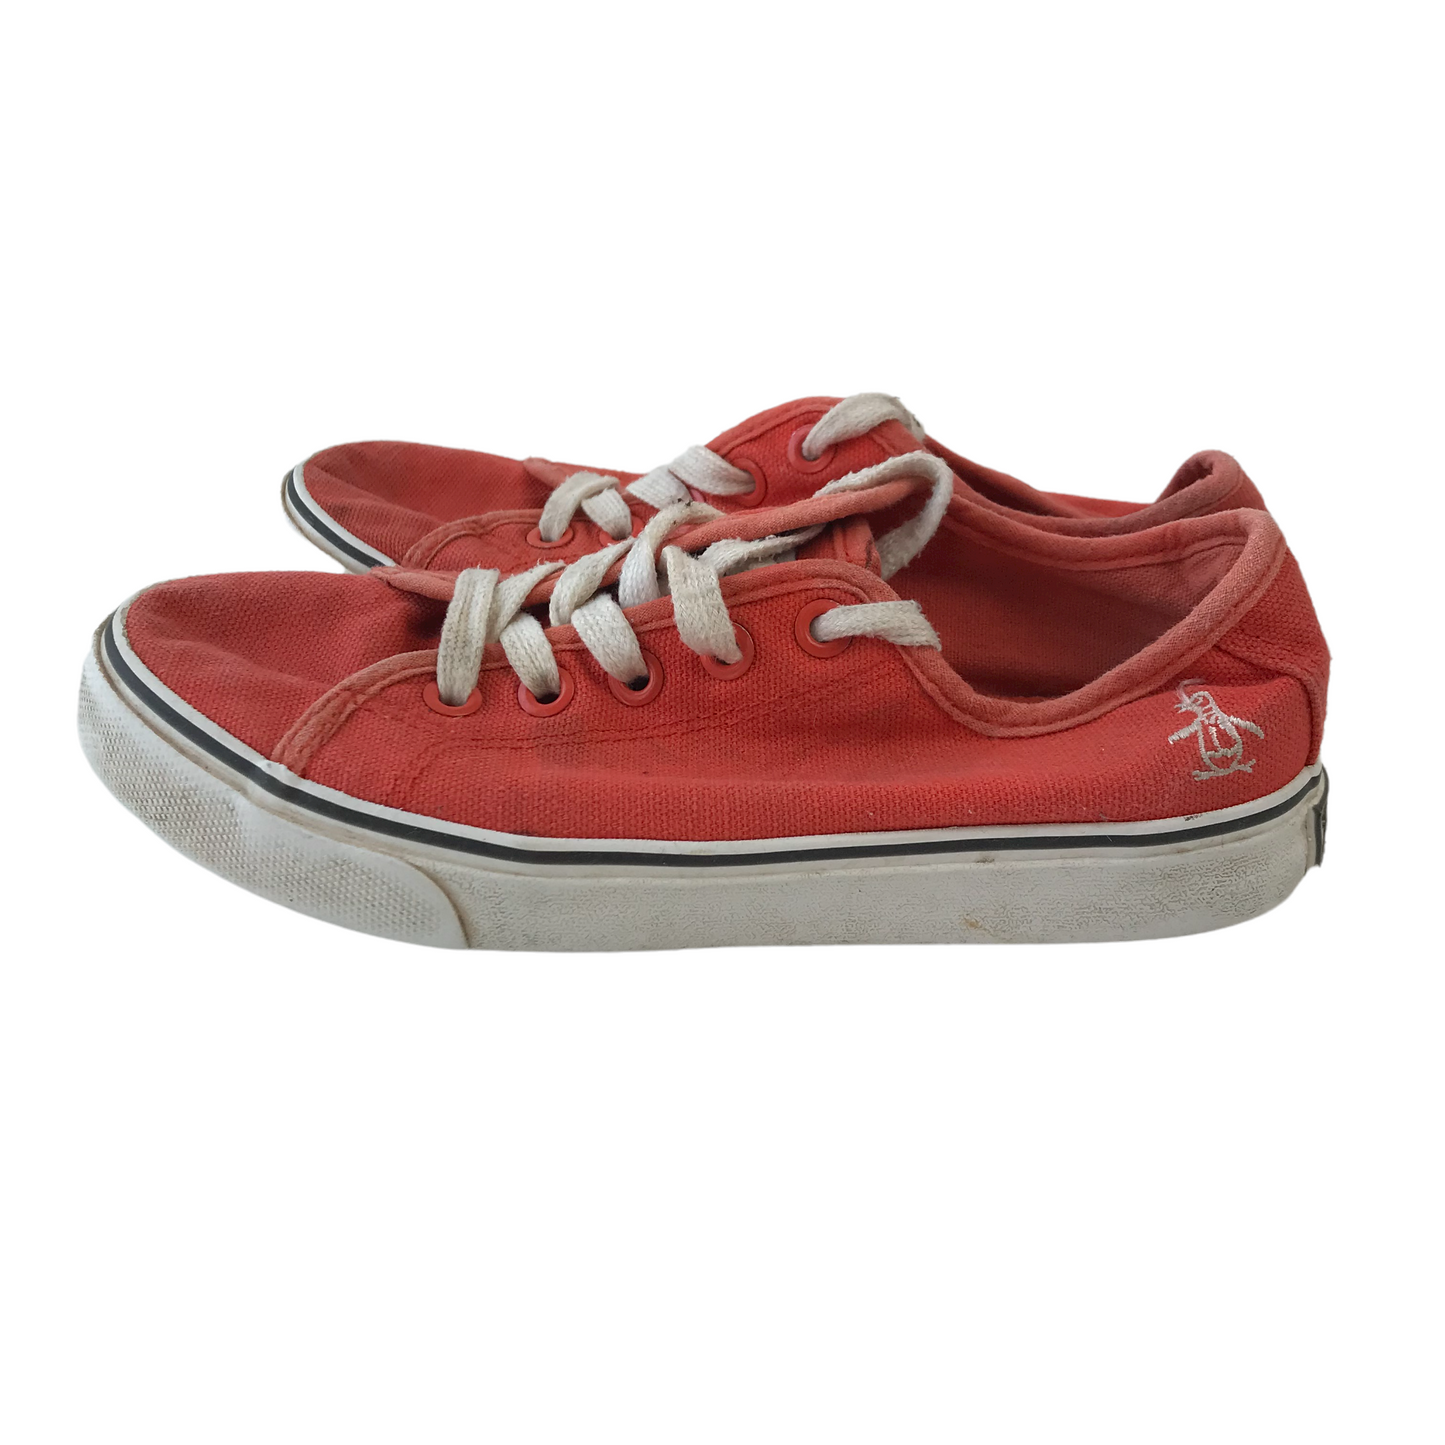 Penguin Red Trainers Shoe Size 1